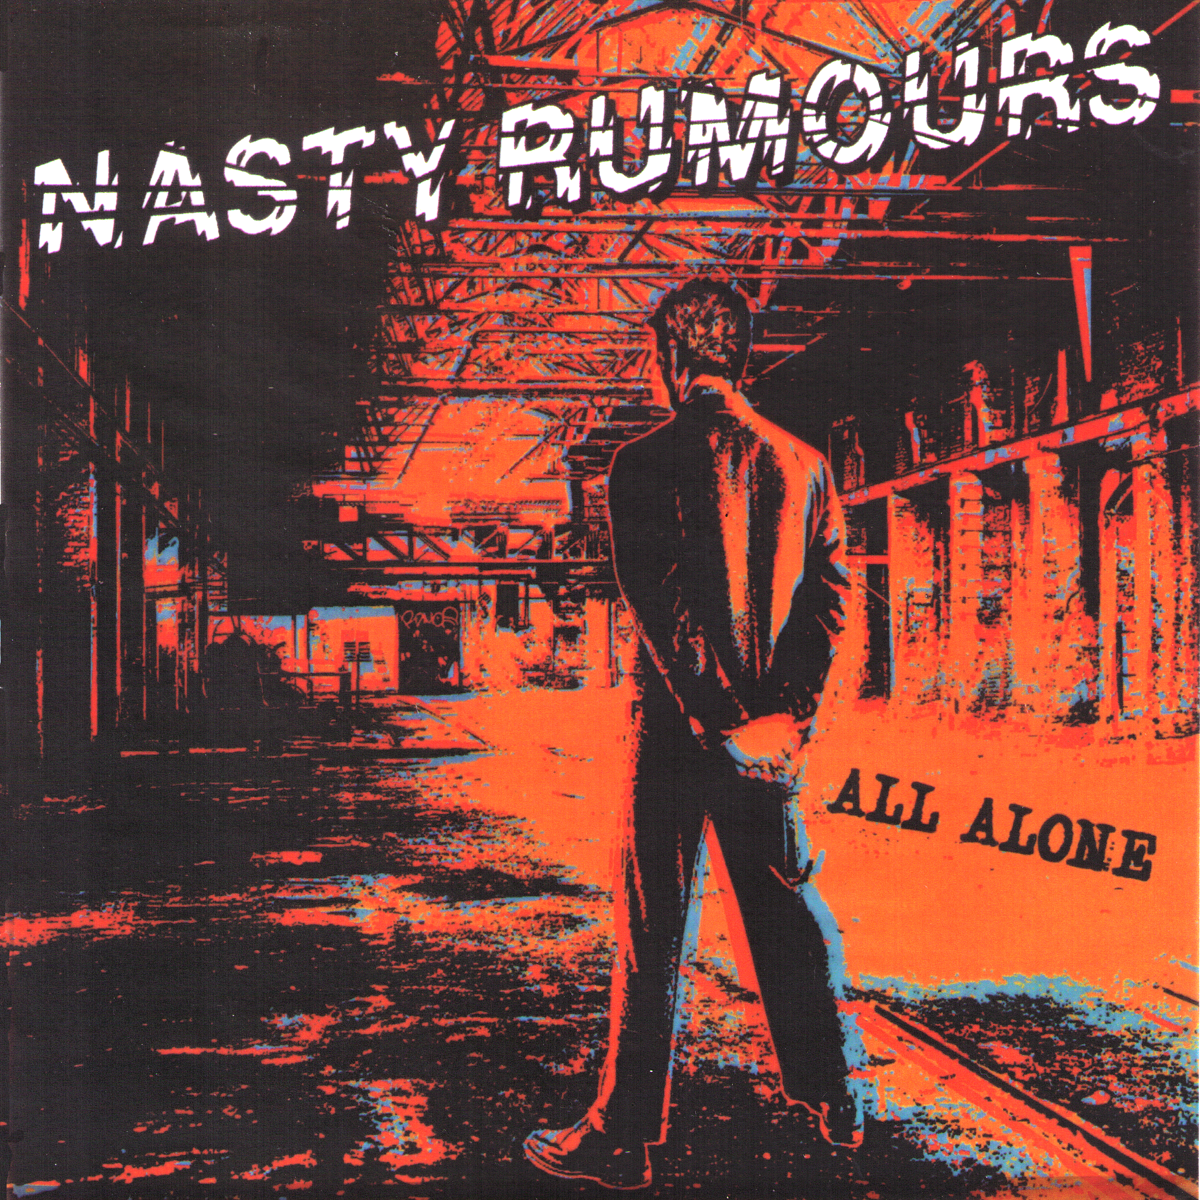 Nasty Rumours- All Alone 7” ~RARE ALT COVER LTD TO 100 COPIES!